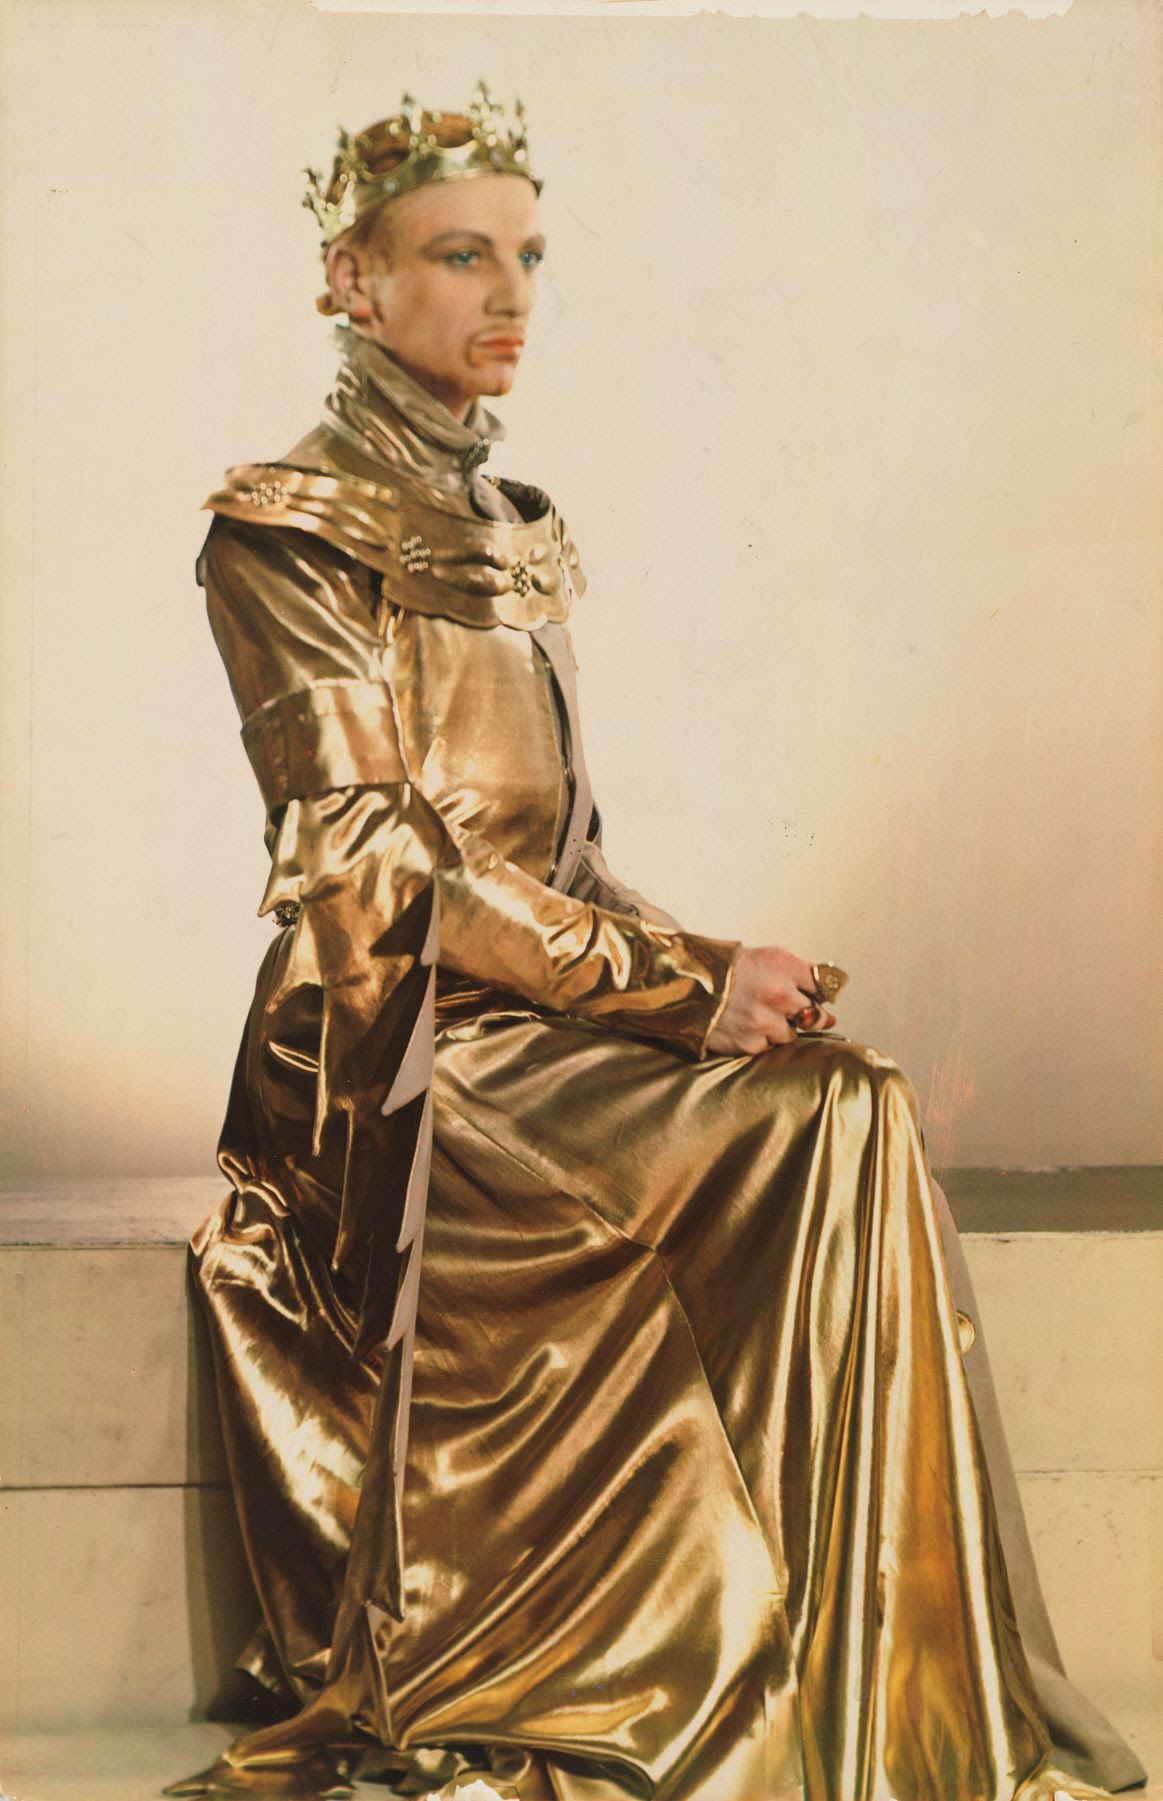 John Gielgud as Richard II in Richard of Bordeaux by Yevonde (1933), given by the photographer, 1971 © National Portrait Gallery, London